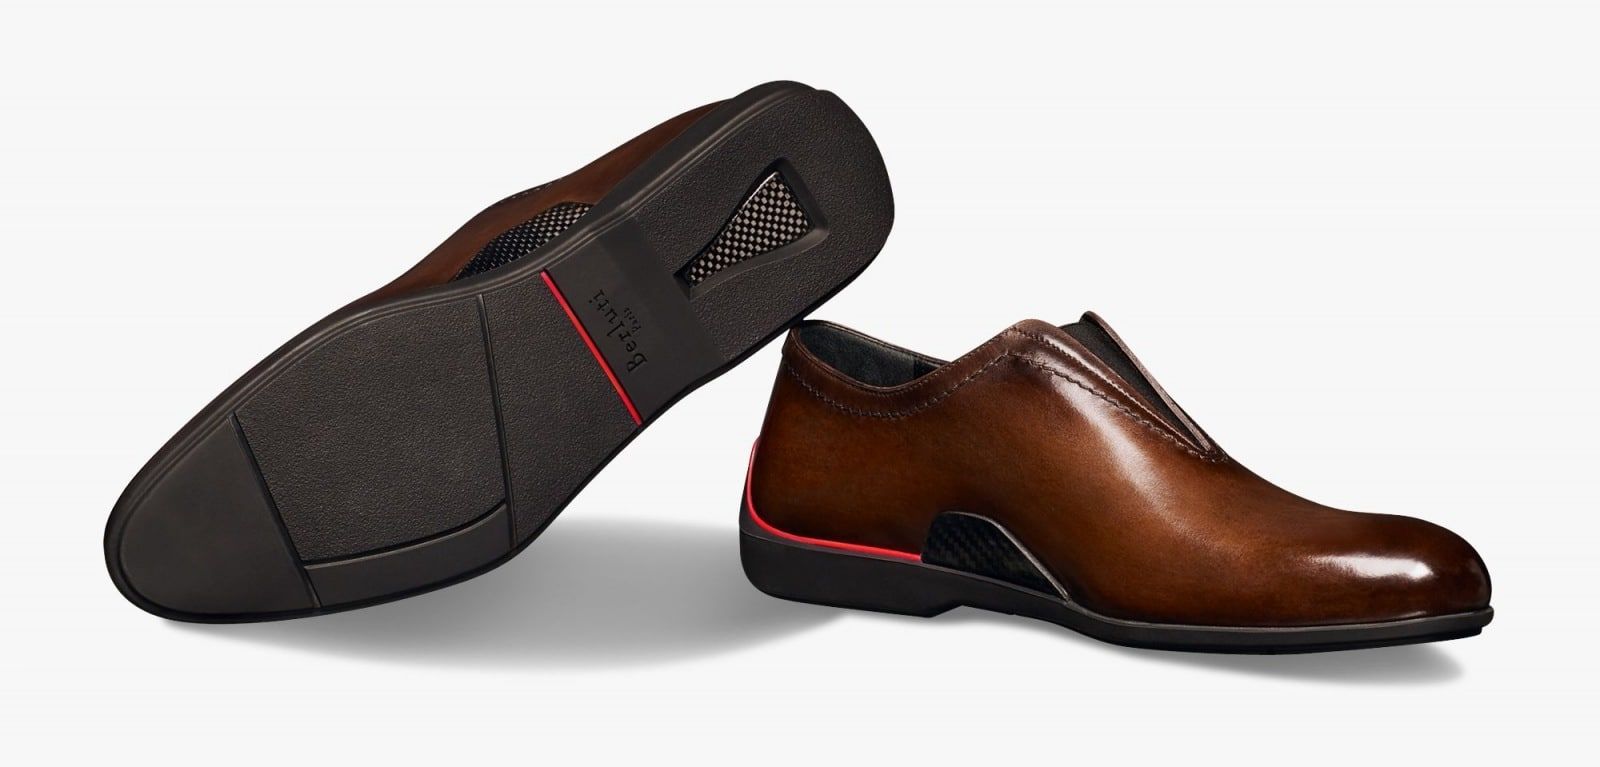 Berluti and Ferrari collaborate to create the ultimate gentleman’s driving shoes